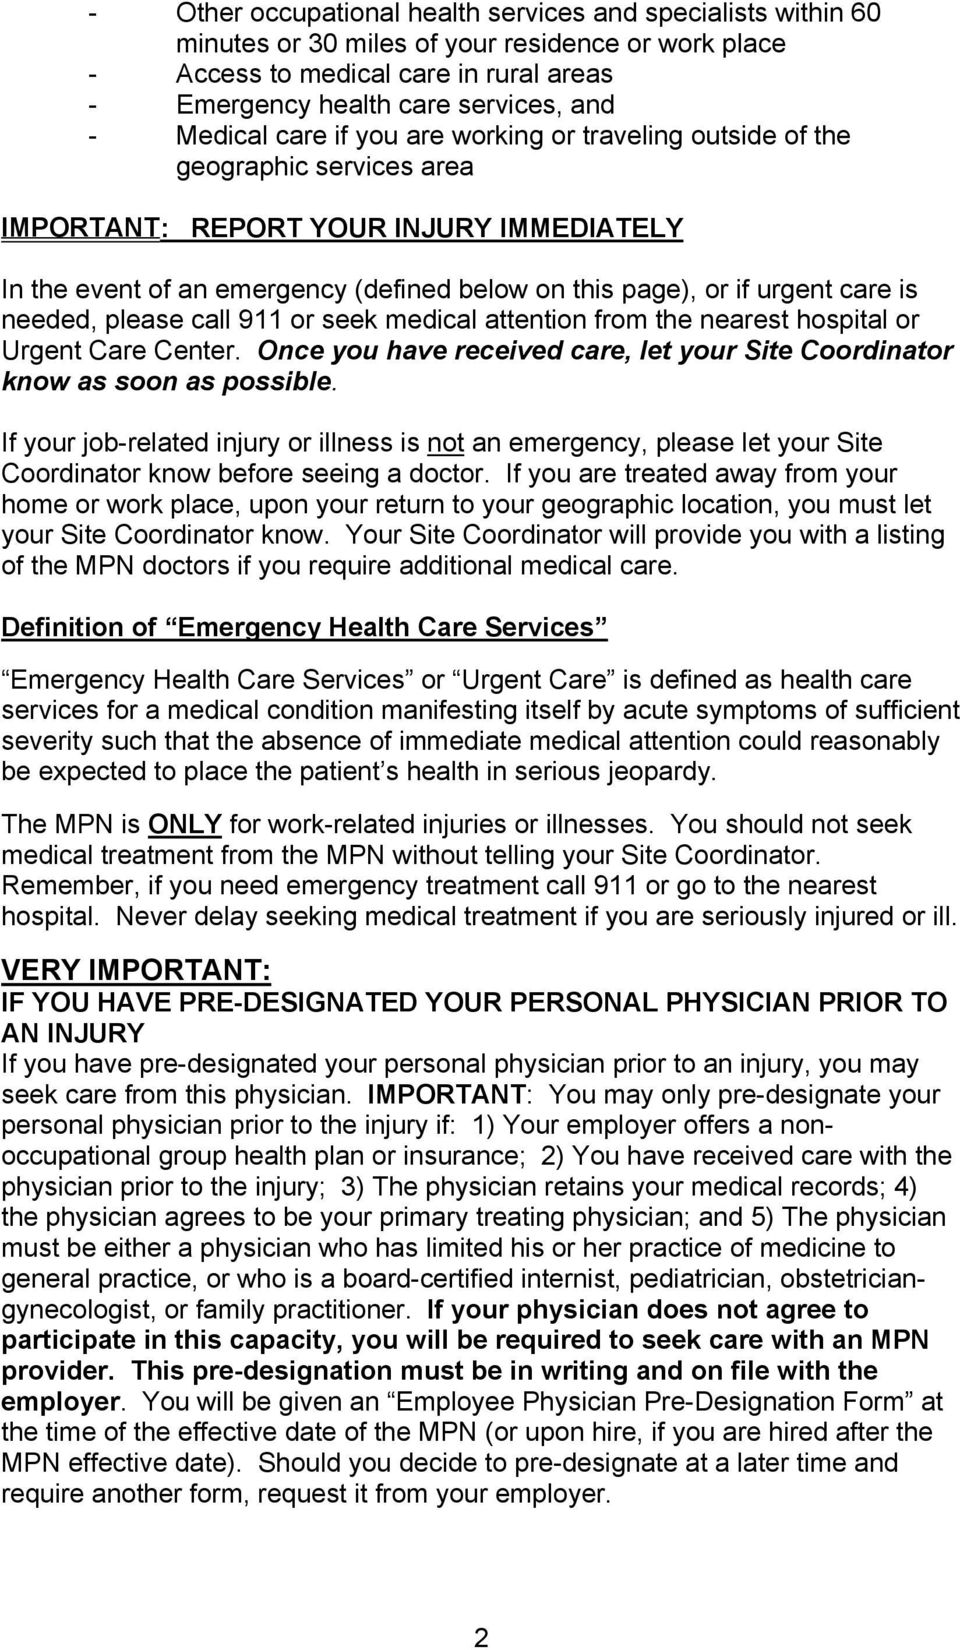 care is needed, please call 911 or seek medical attention from the nearest hospital or Urgent Care Center. Once you have received care, let your Site Coordinator know as soon as possible.